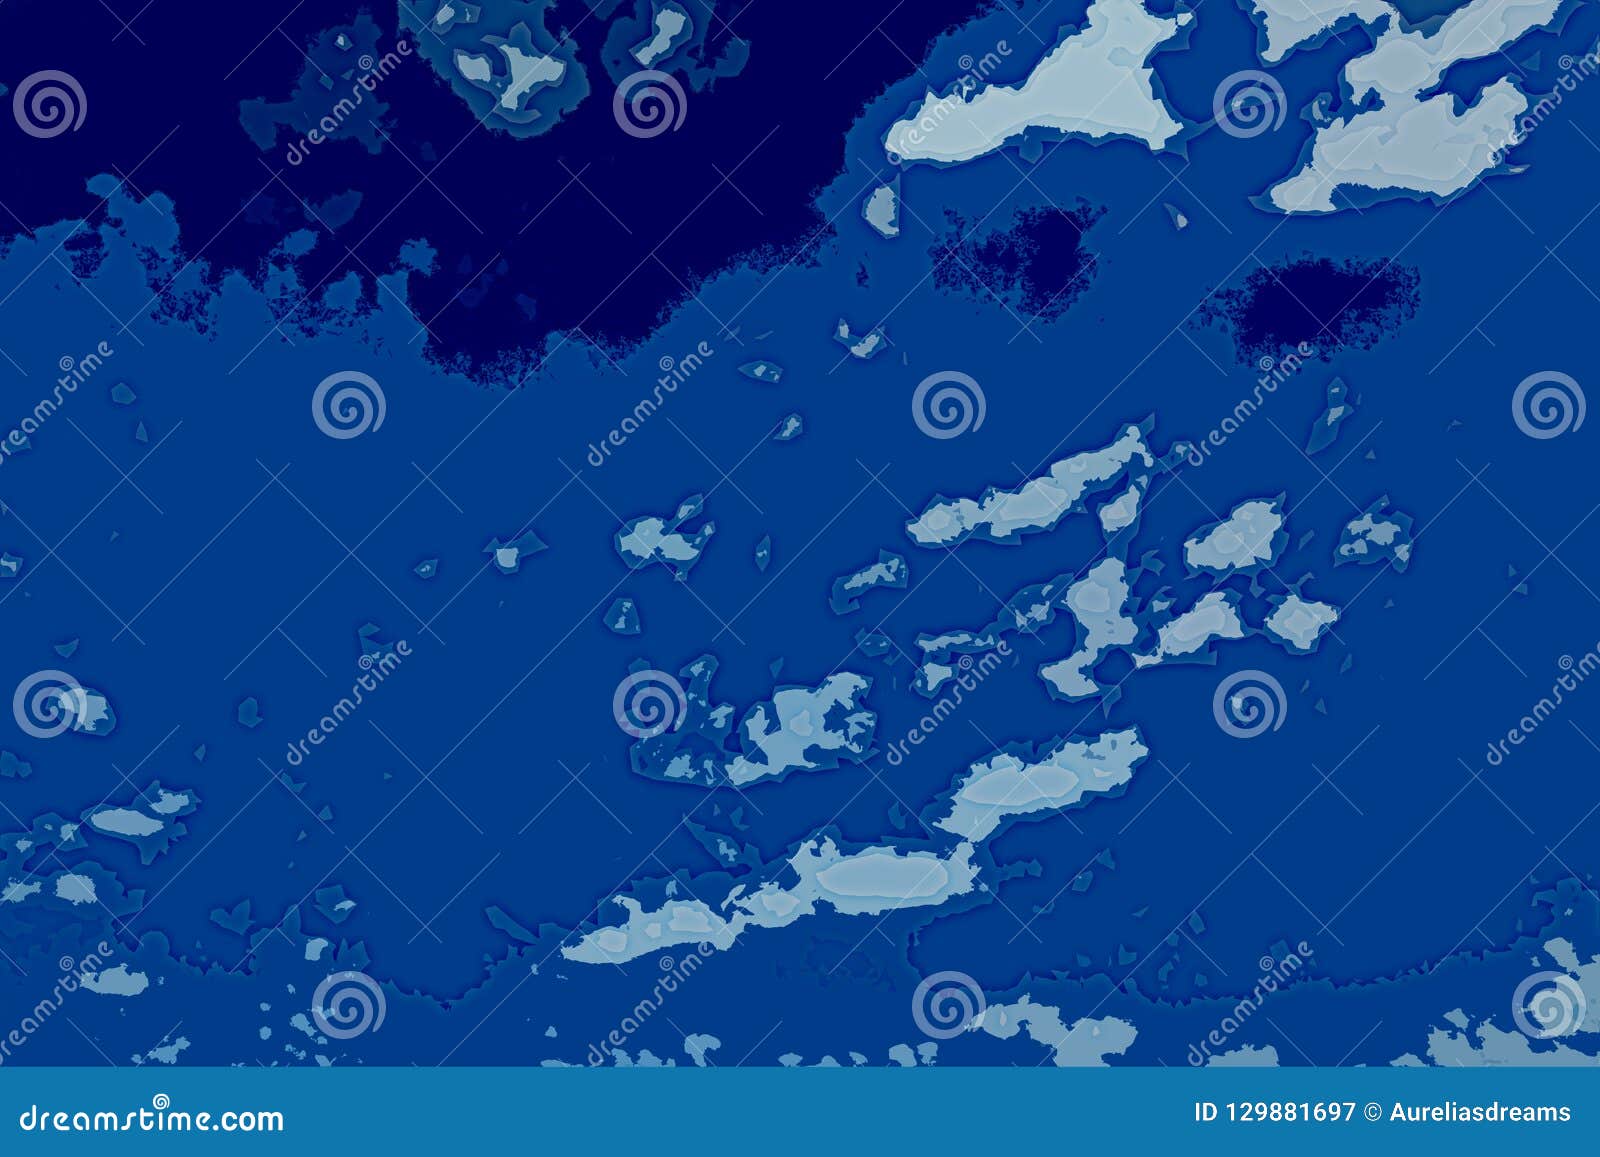 White and Blue Abstract Background Texture. Fantasy Map with North ...